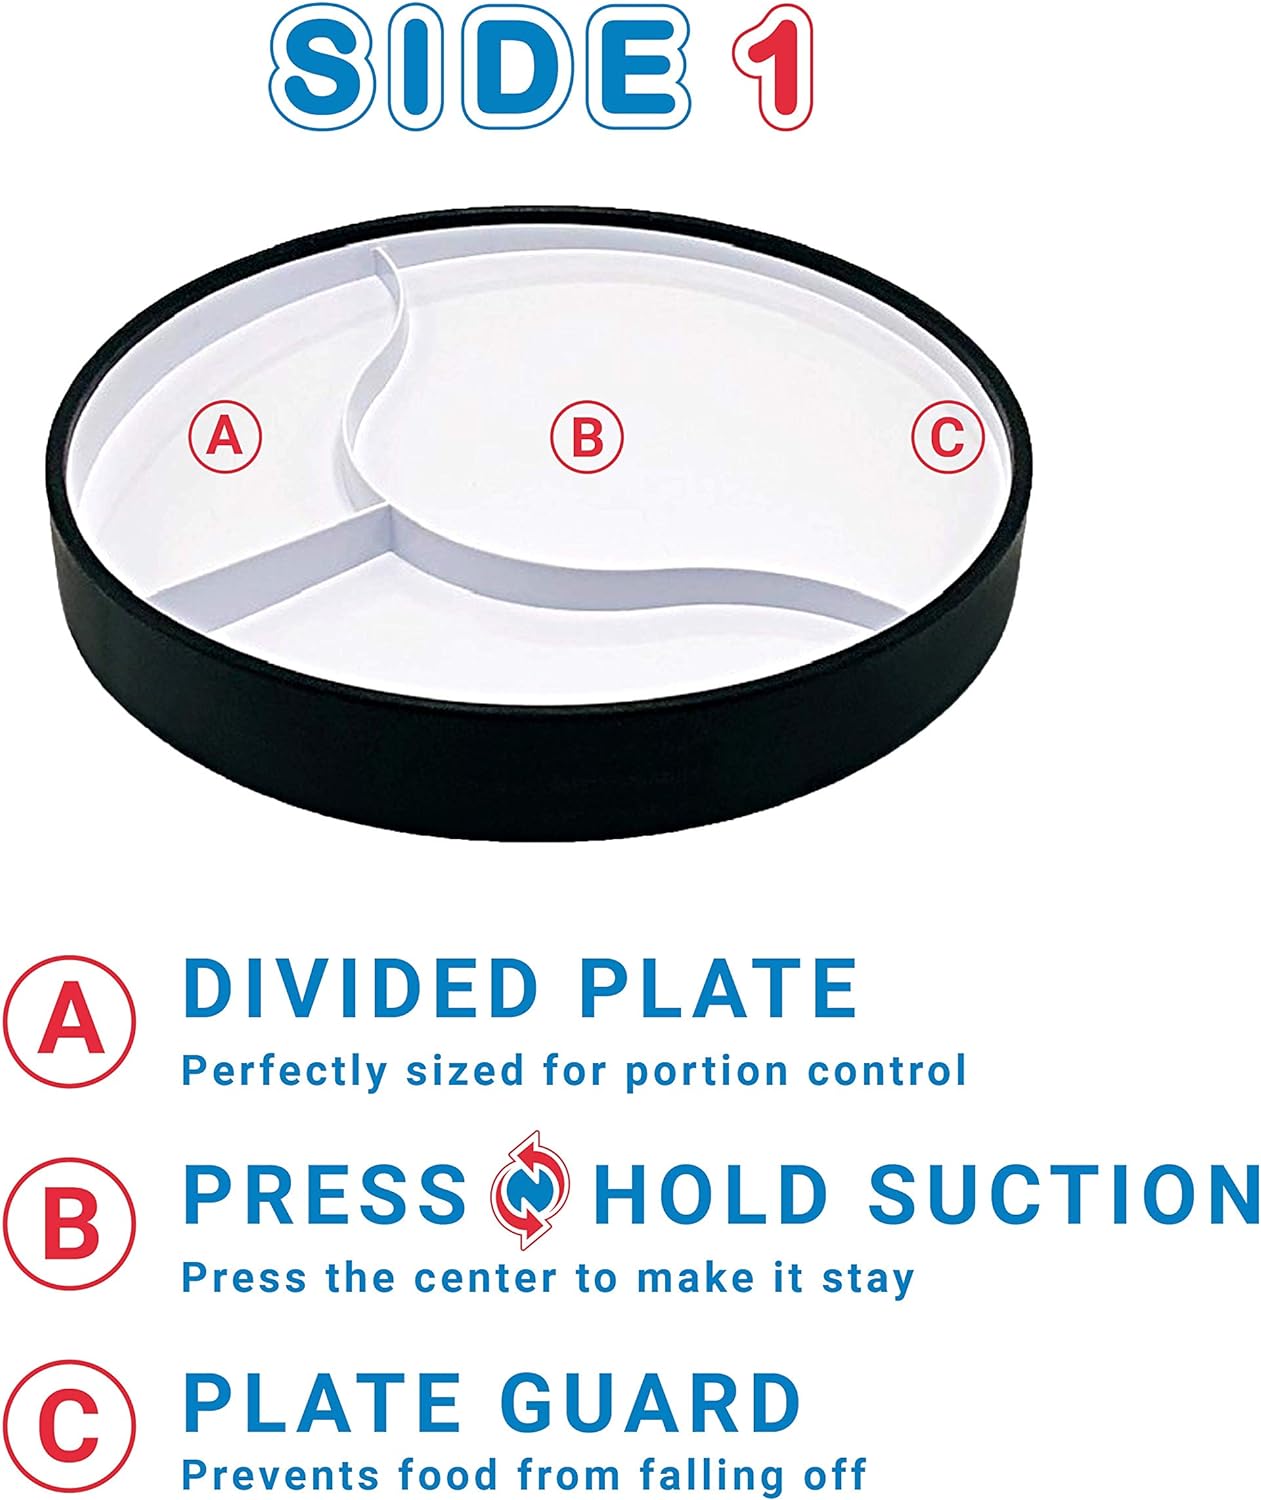 Divide plate, press and hold suction in the center and plate guard around the edge: Non slip, suction, scoop plate for easier eating that's BPA free for adults